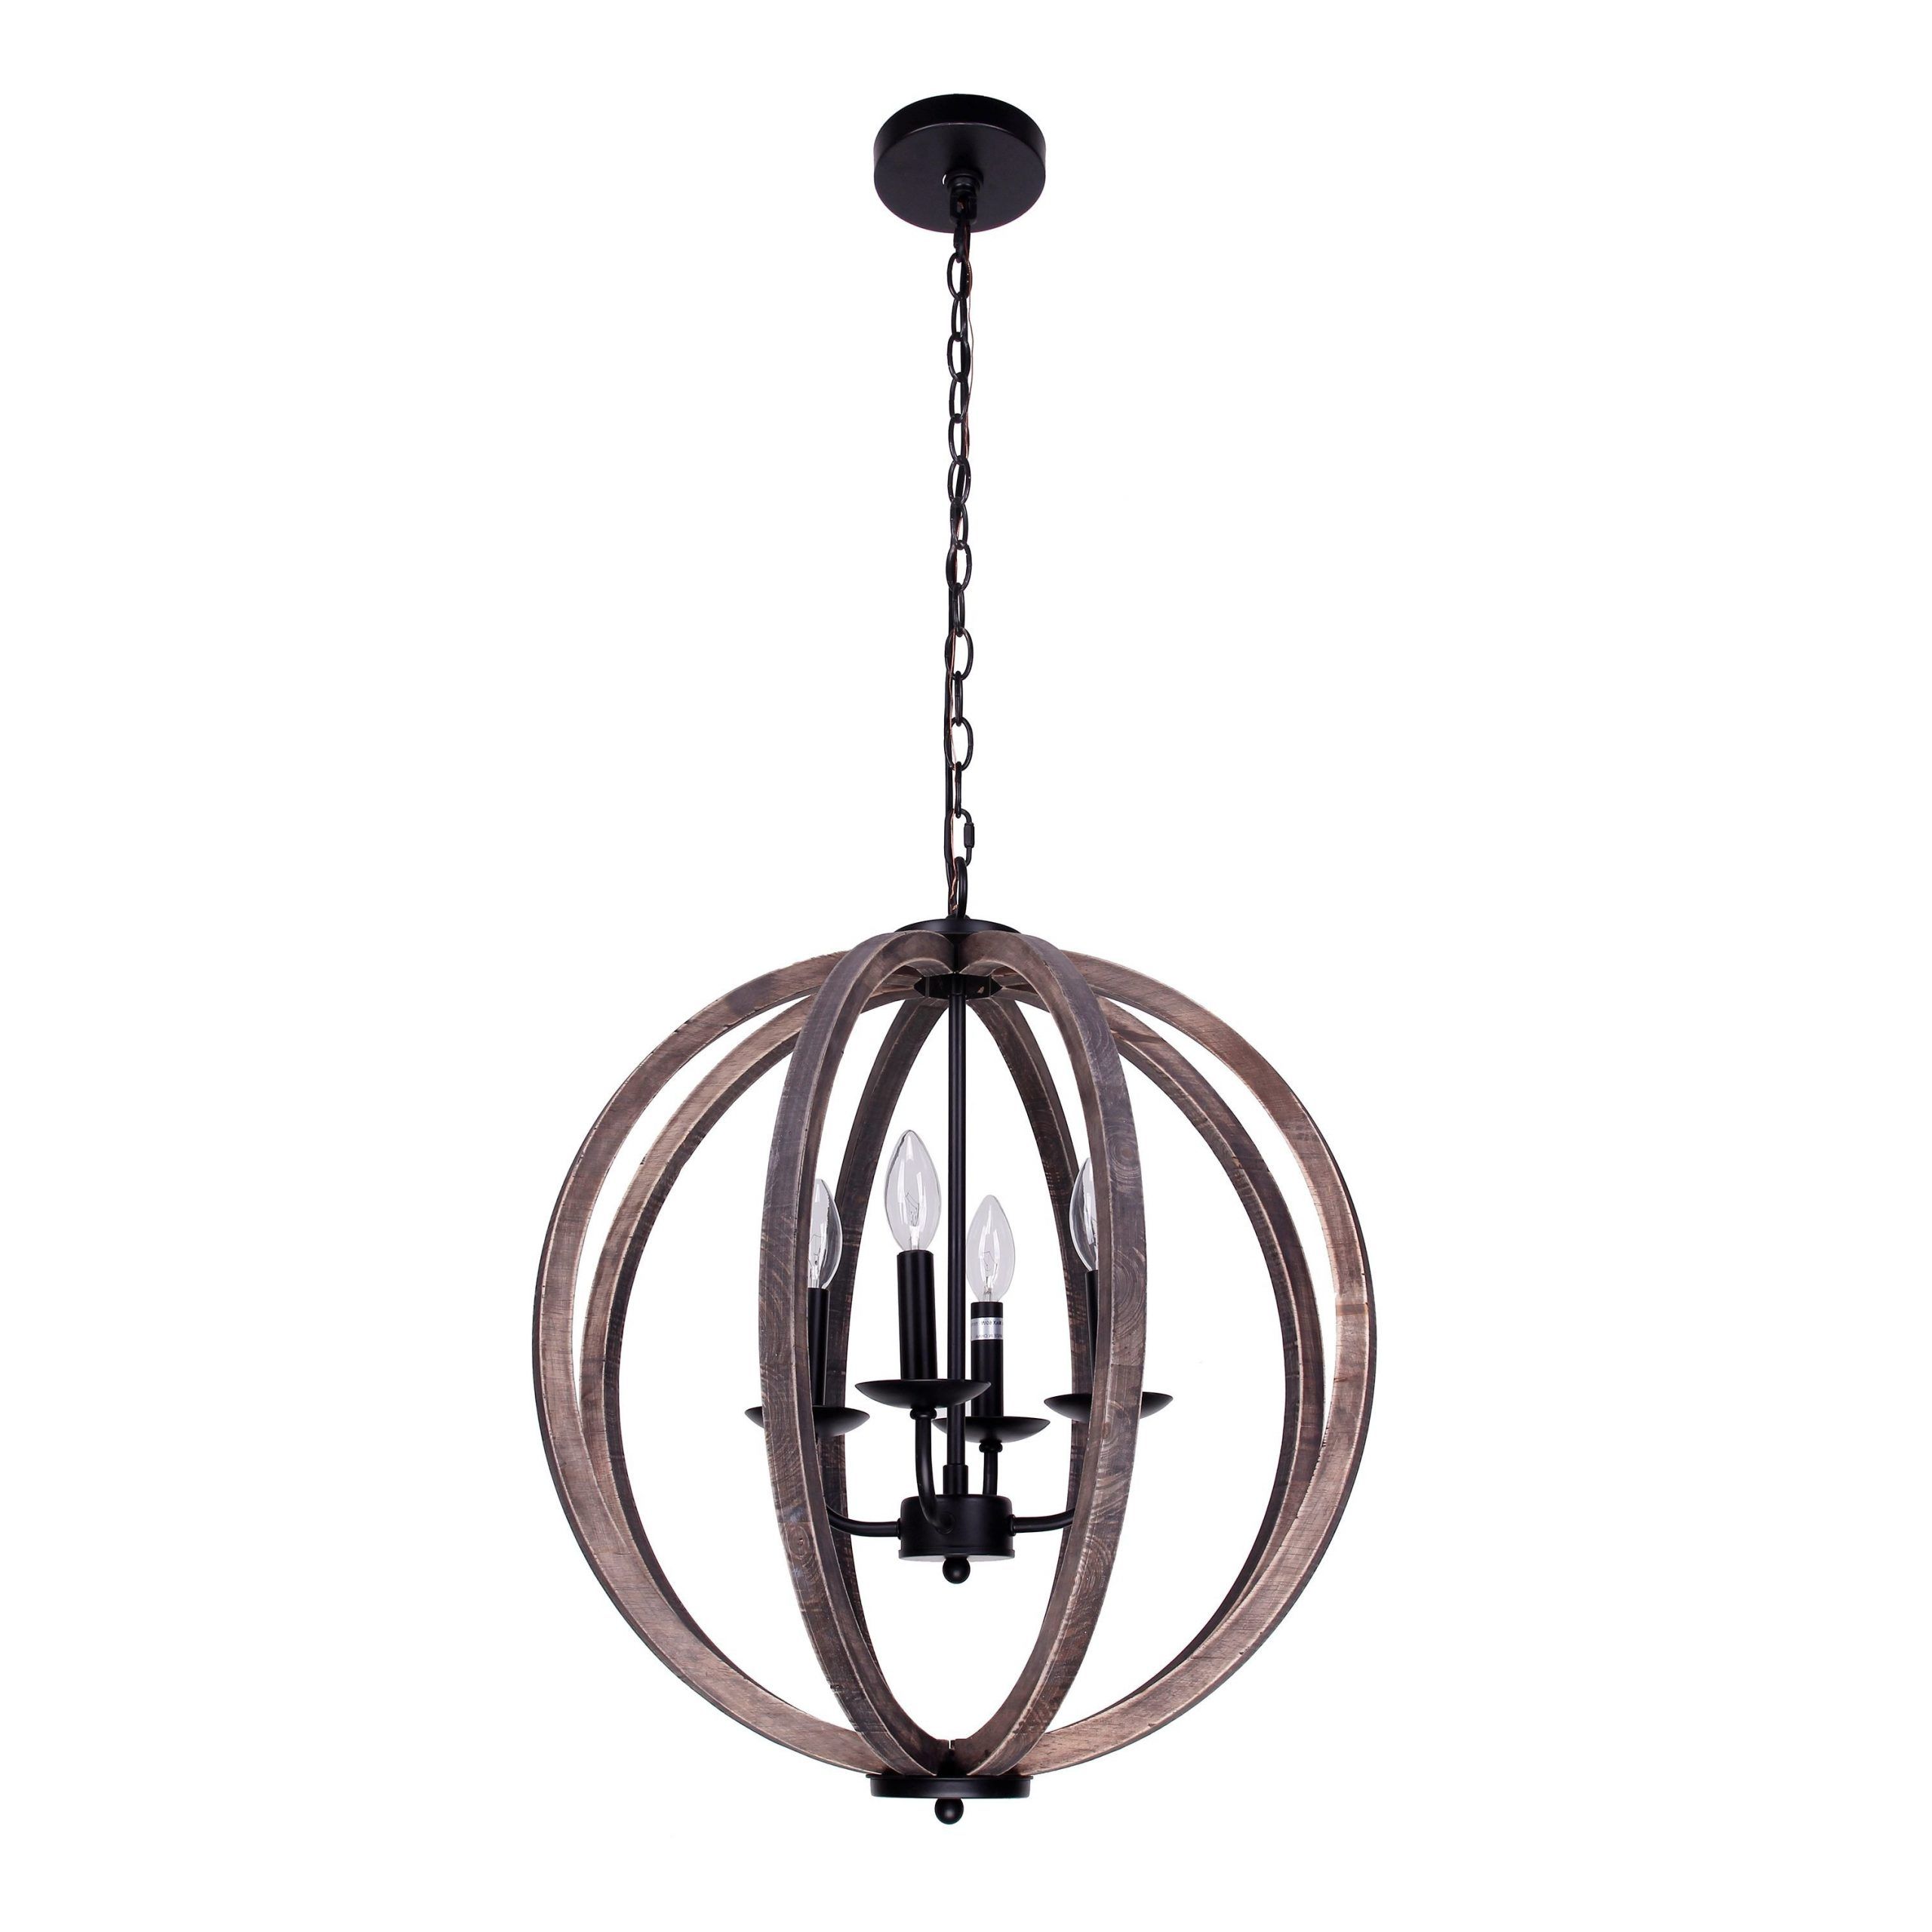 Shop 21 Inch Distressed Weathered Oak Wood 4 Light Orb Within 2020 Weathered Oak Wood Chandeliers (View 3 of 15)